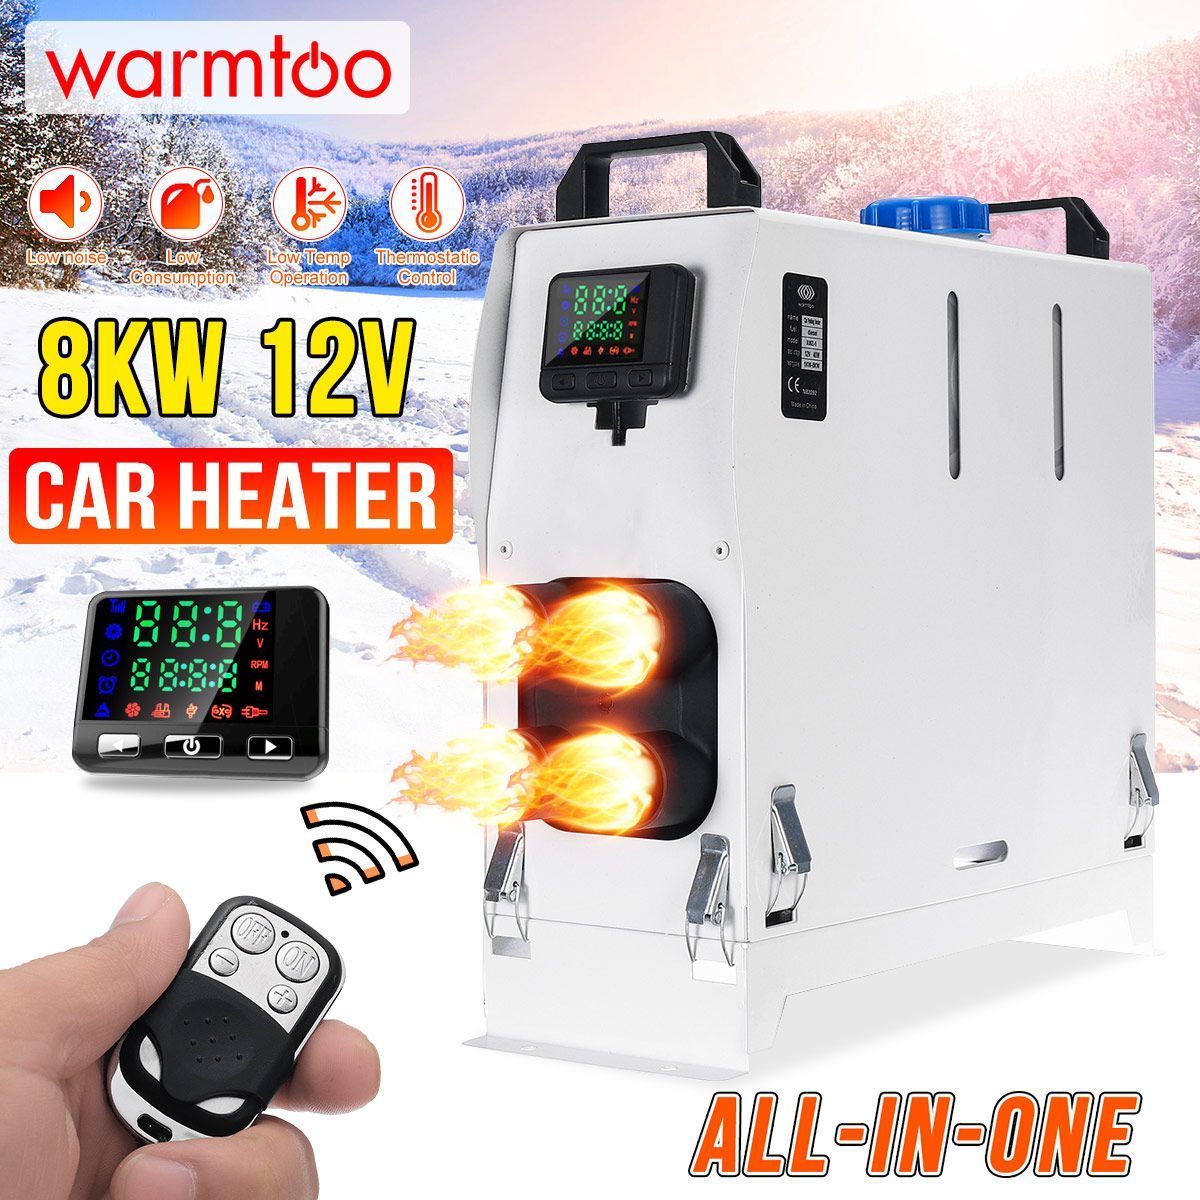 Warmtoo-All-In-One-12V-8KW-Diesel-Air-Heater-Car-Parking-Heater-Model-1606940